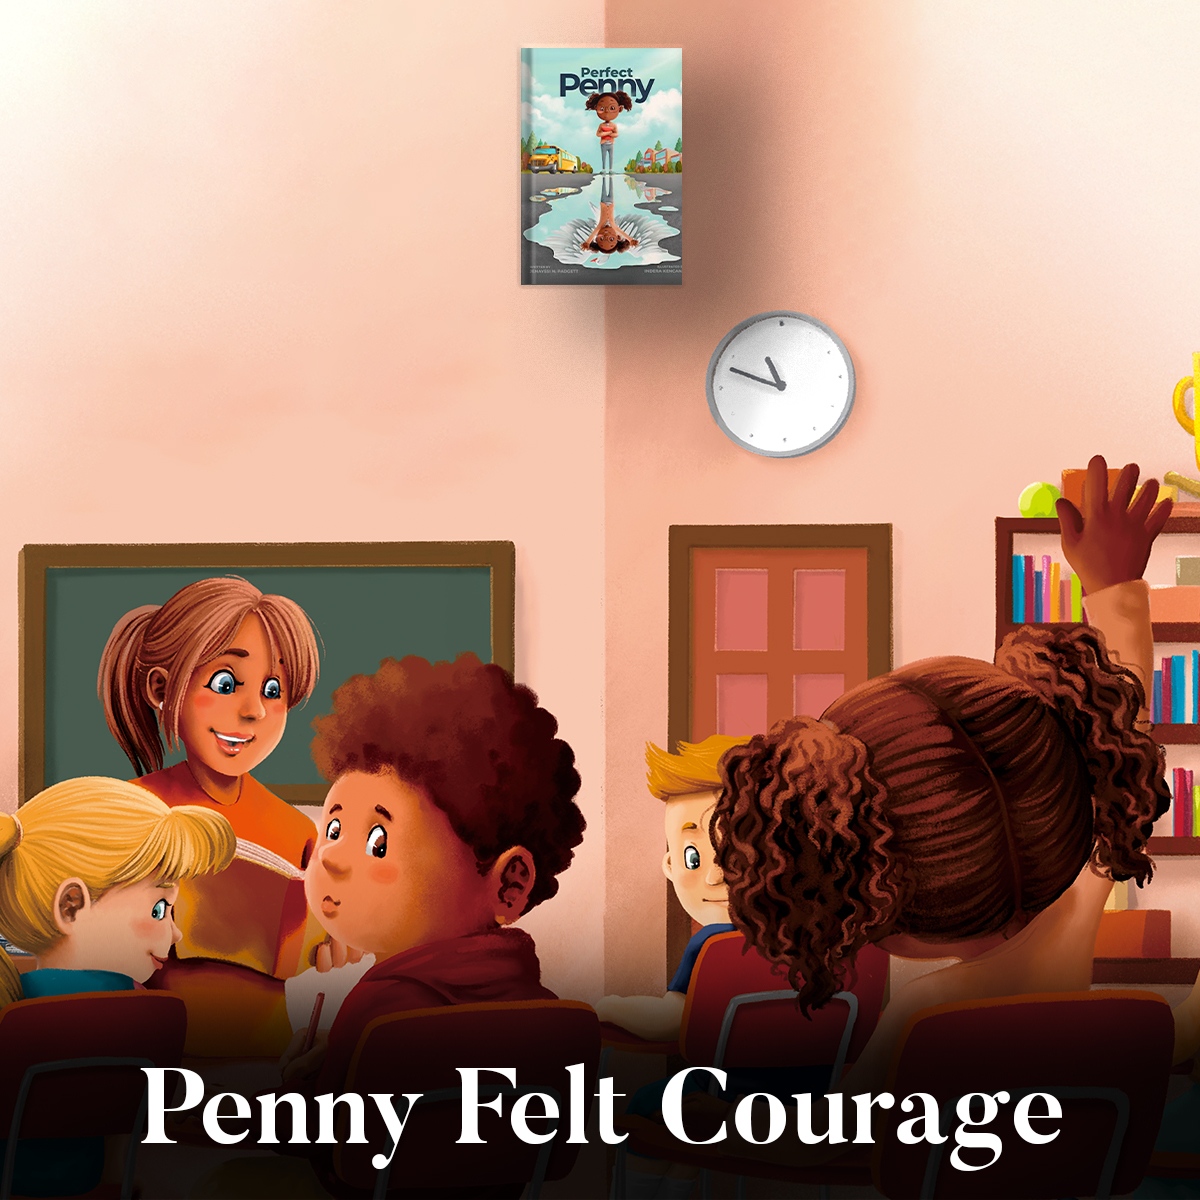 She feels confident about herself. Get a copy of the book Perfect Penny written by Jenayssi Padget now by clicking the link perfectpennyseries.com #childrenbook #author #booklaunch #newbook #childreneducation #childdevelopment #investinourchildren #perfectpenny